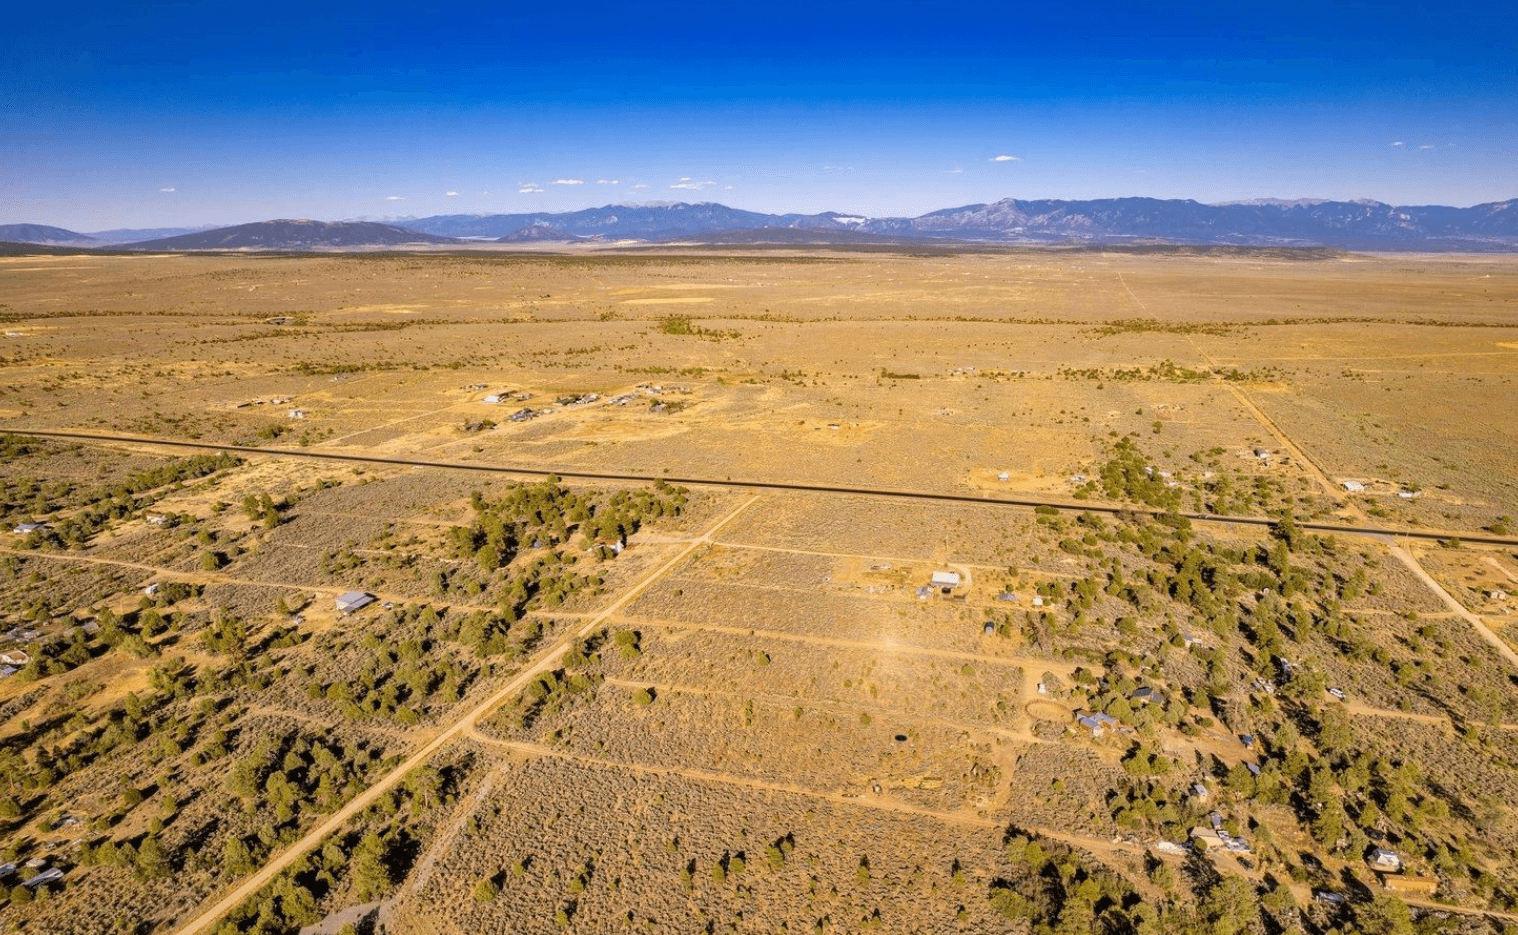 Diversify Your Real Estate Portfolio: 10-Lot Package Available in New Mexico! BIDDING IS PER LOT!